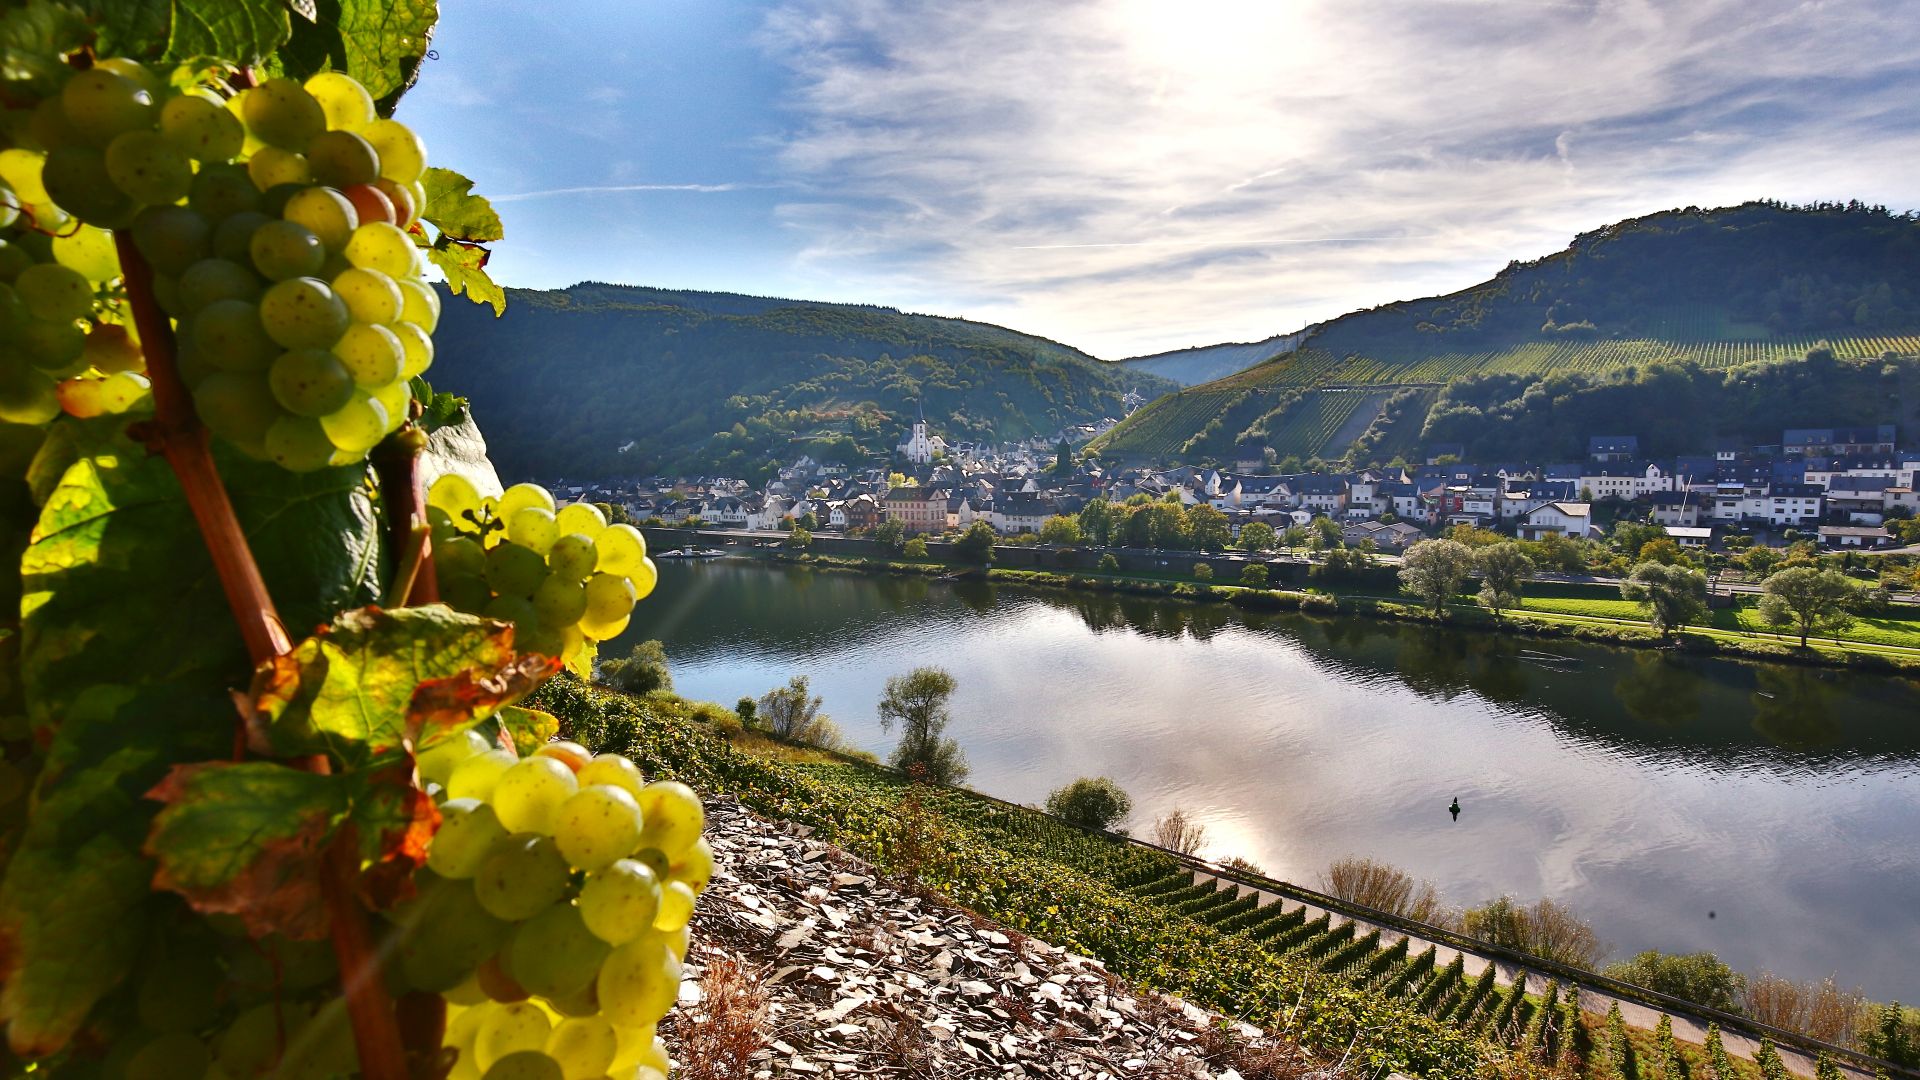 Briedel: Riesling grapes in the vineyards of the Moselle valley